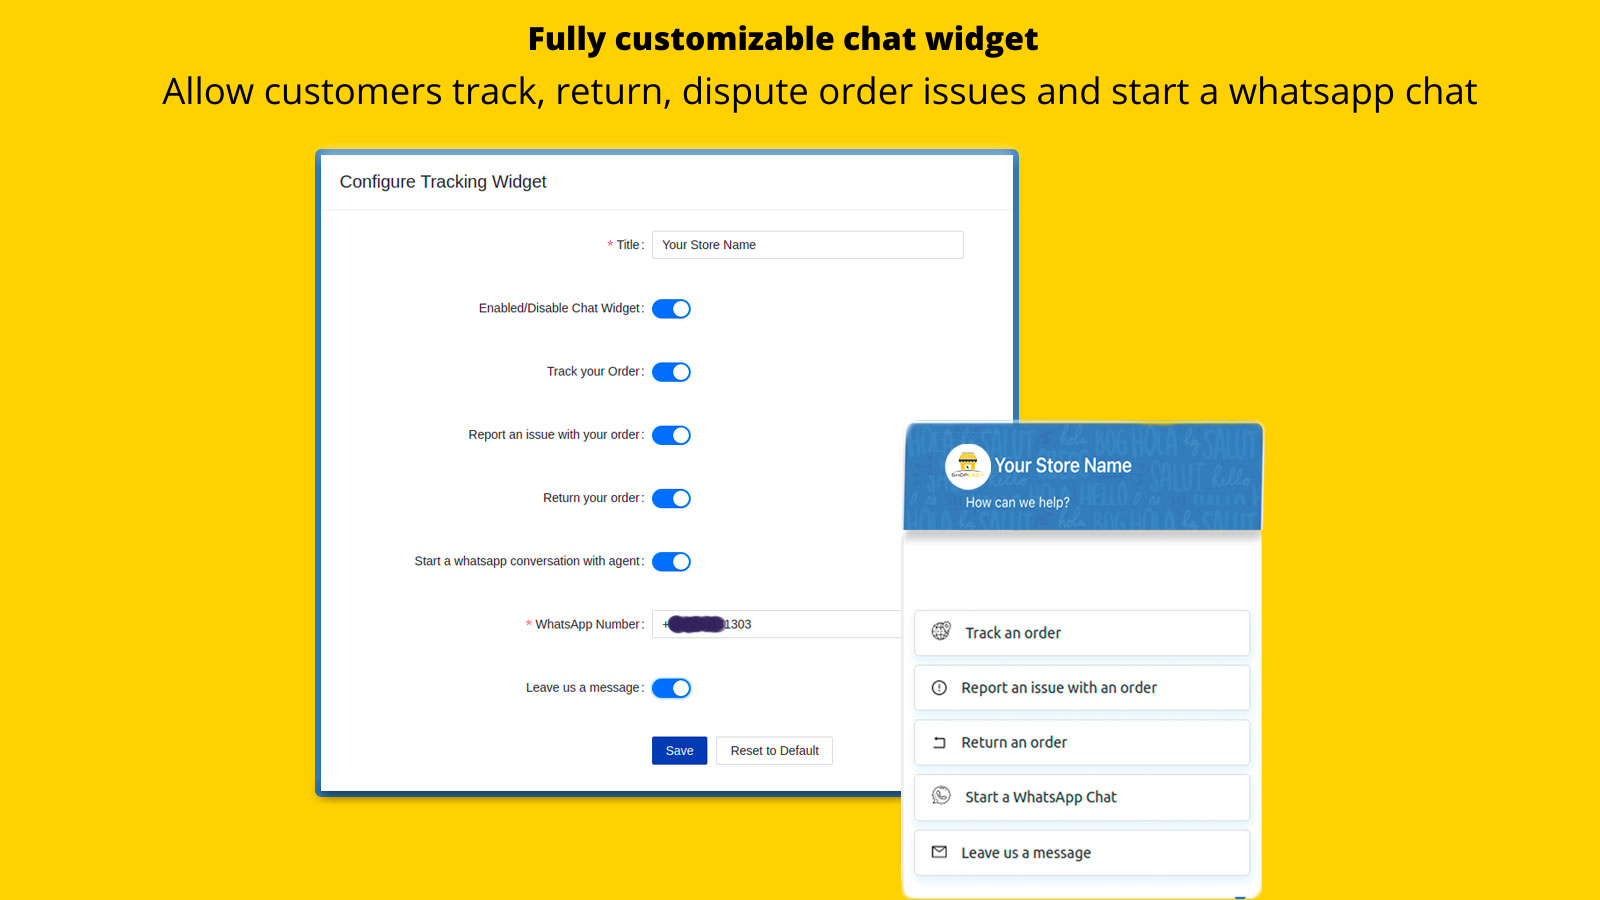 Fully customizable chatbot including whatsapp chat